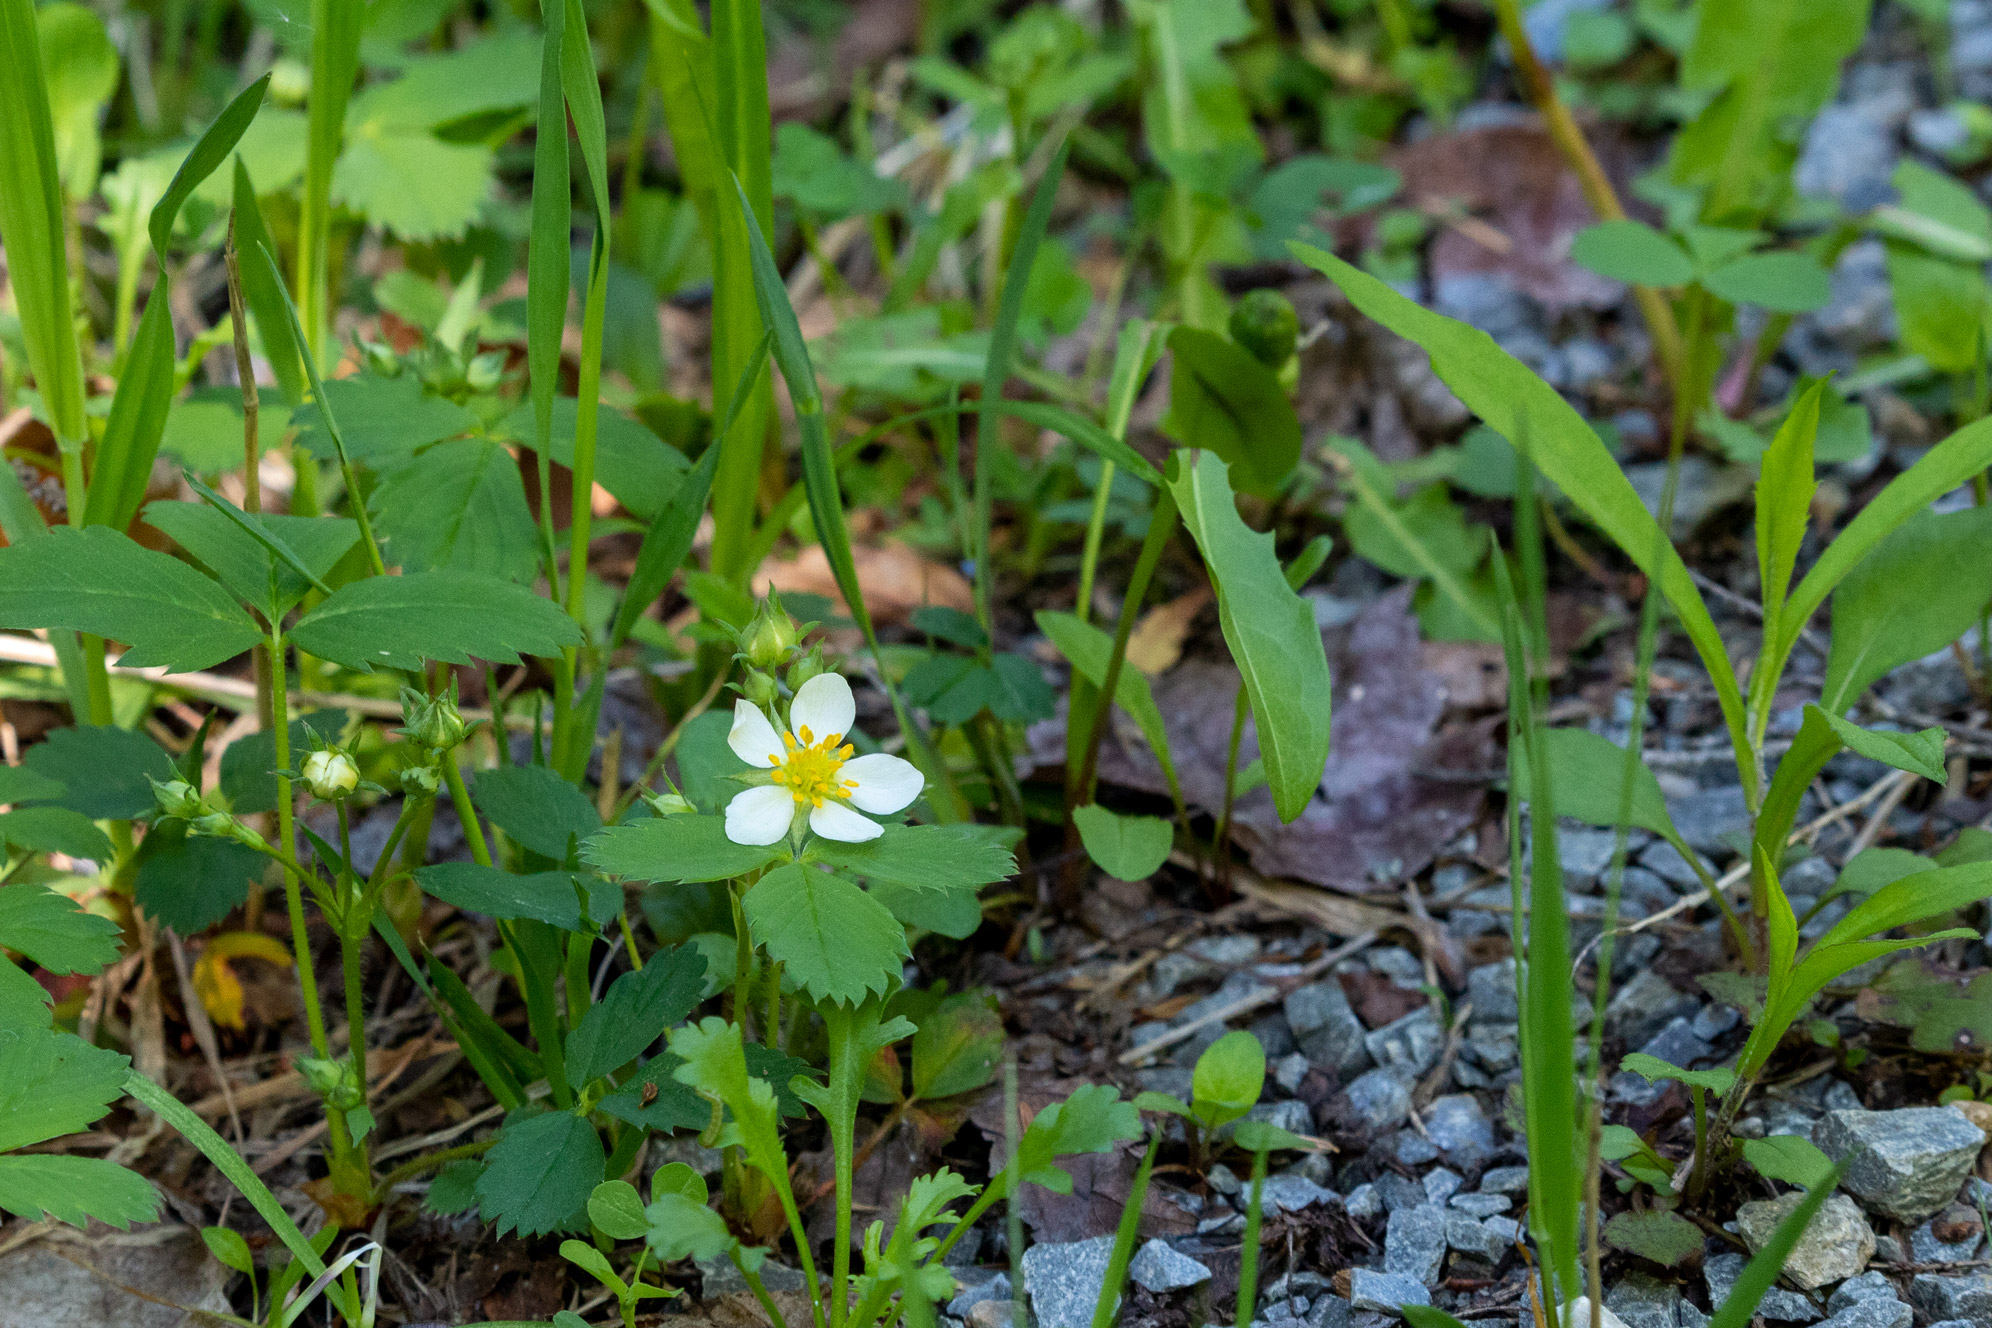 Young strawberry plant with a single white blossom